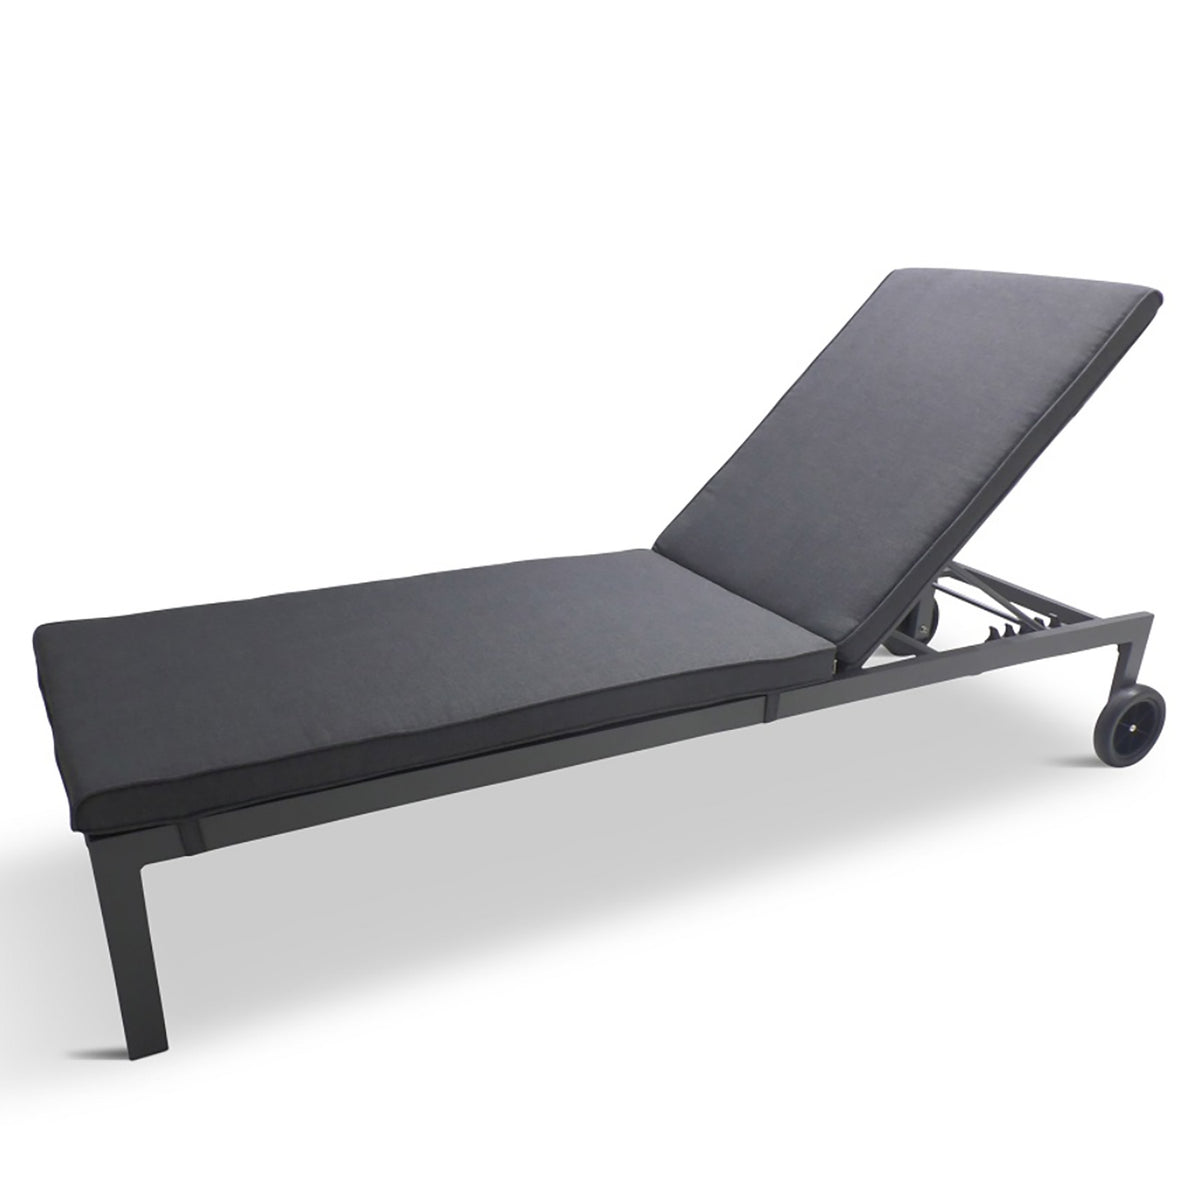 LG Outdoor Monza Aluminium Sunlounger Bed with Cushion